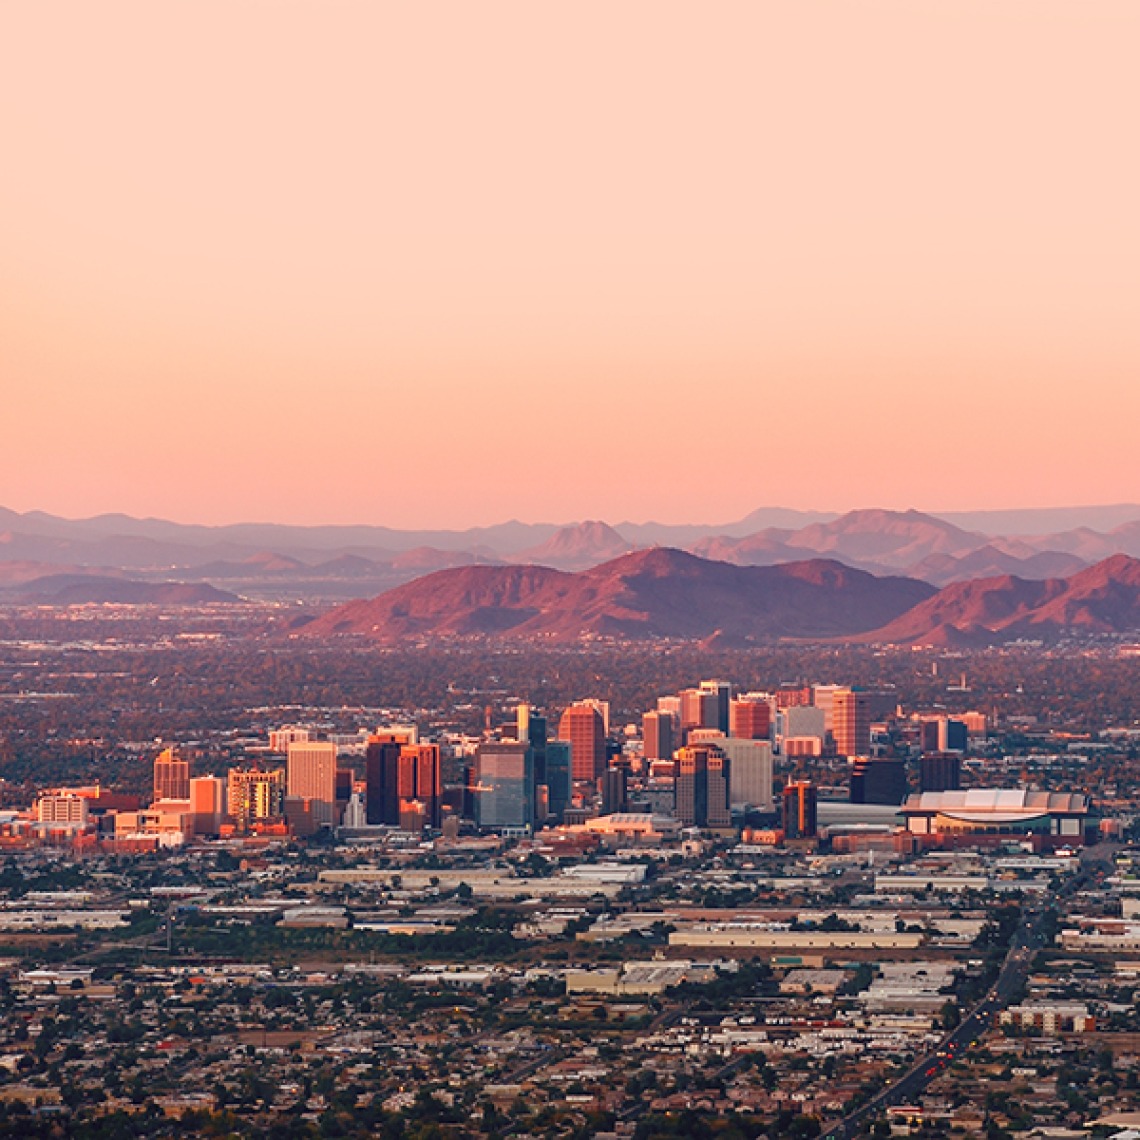 An aerial photo of the City of Phoenix at sunset.